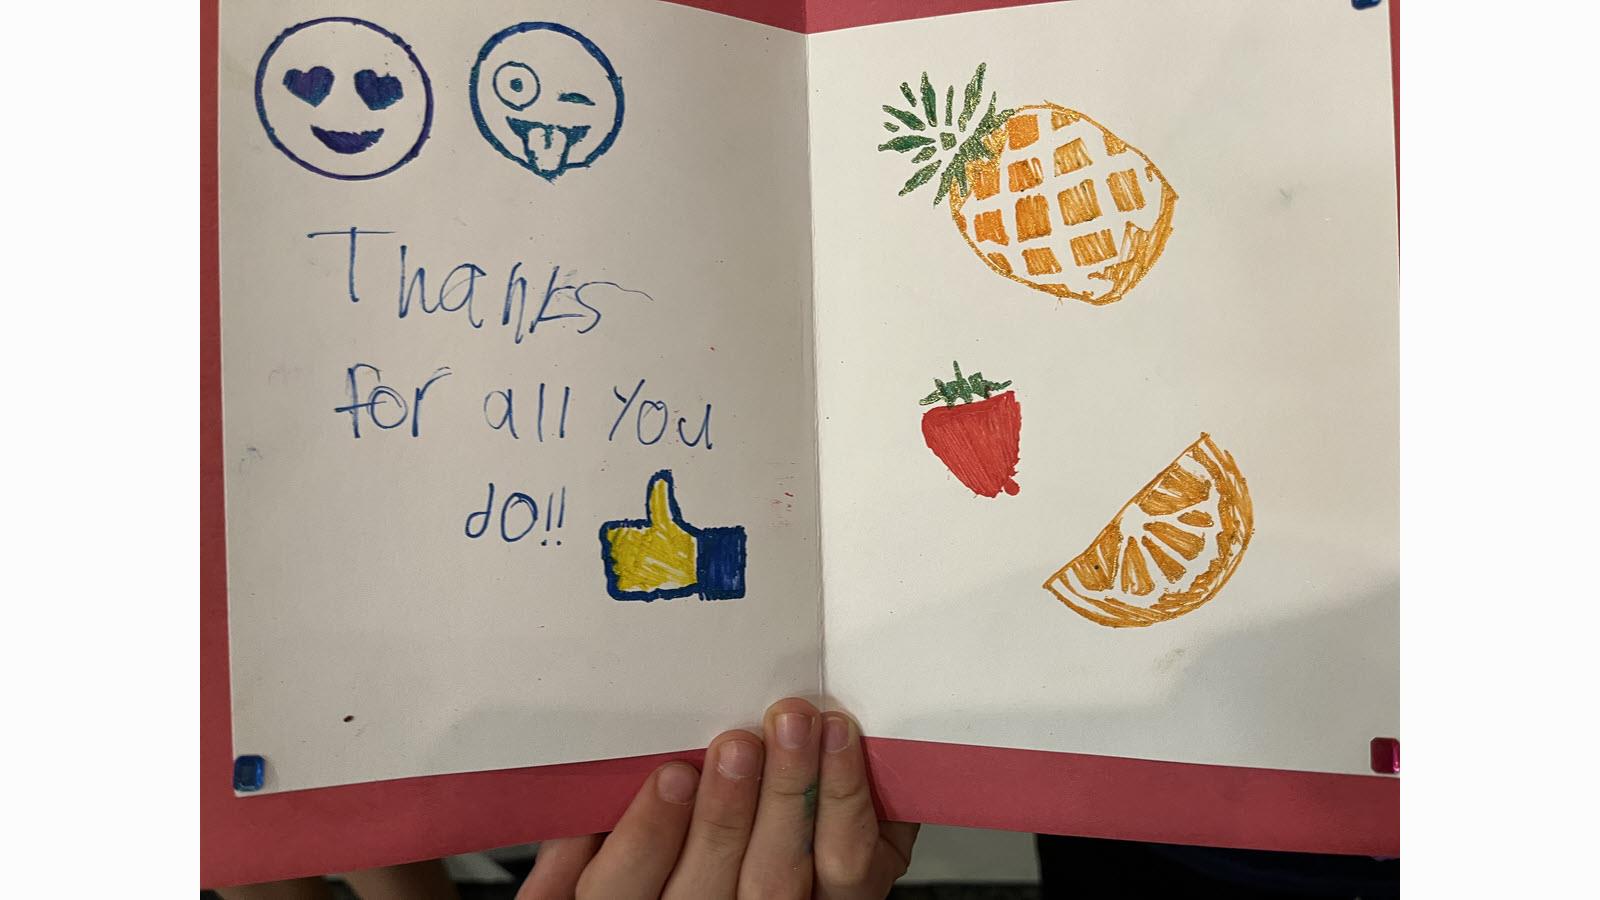 A child's hand-drawn card that says "Thanks for all you do" with images of a pineapple and other fruit